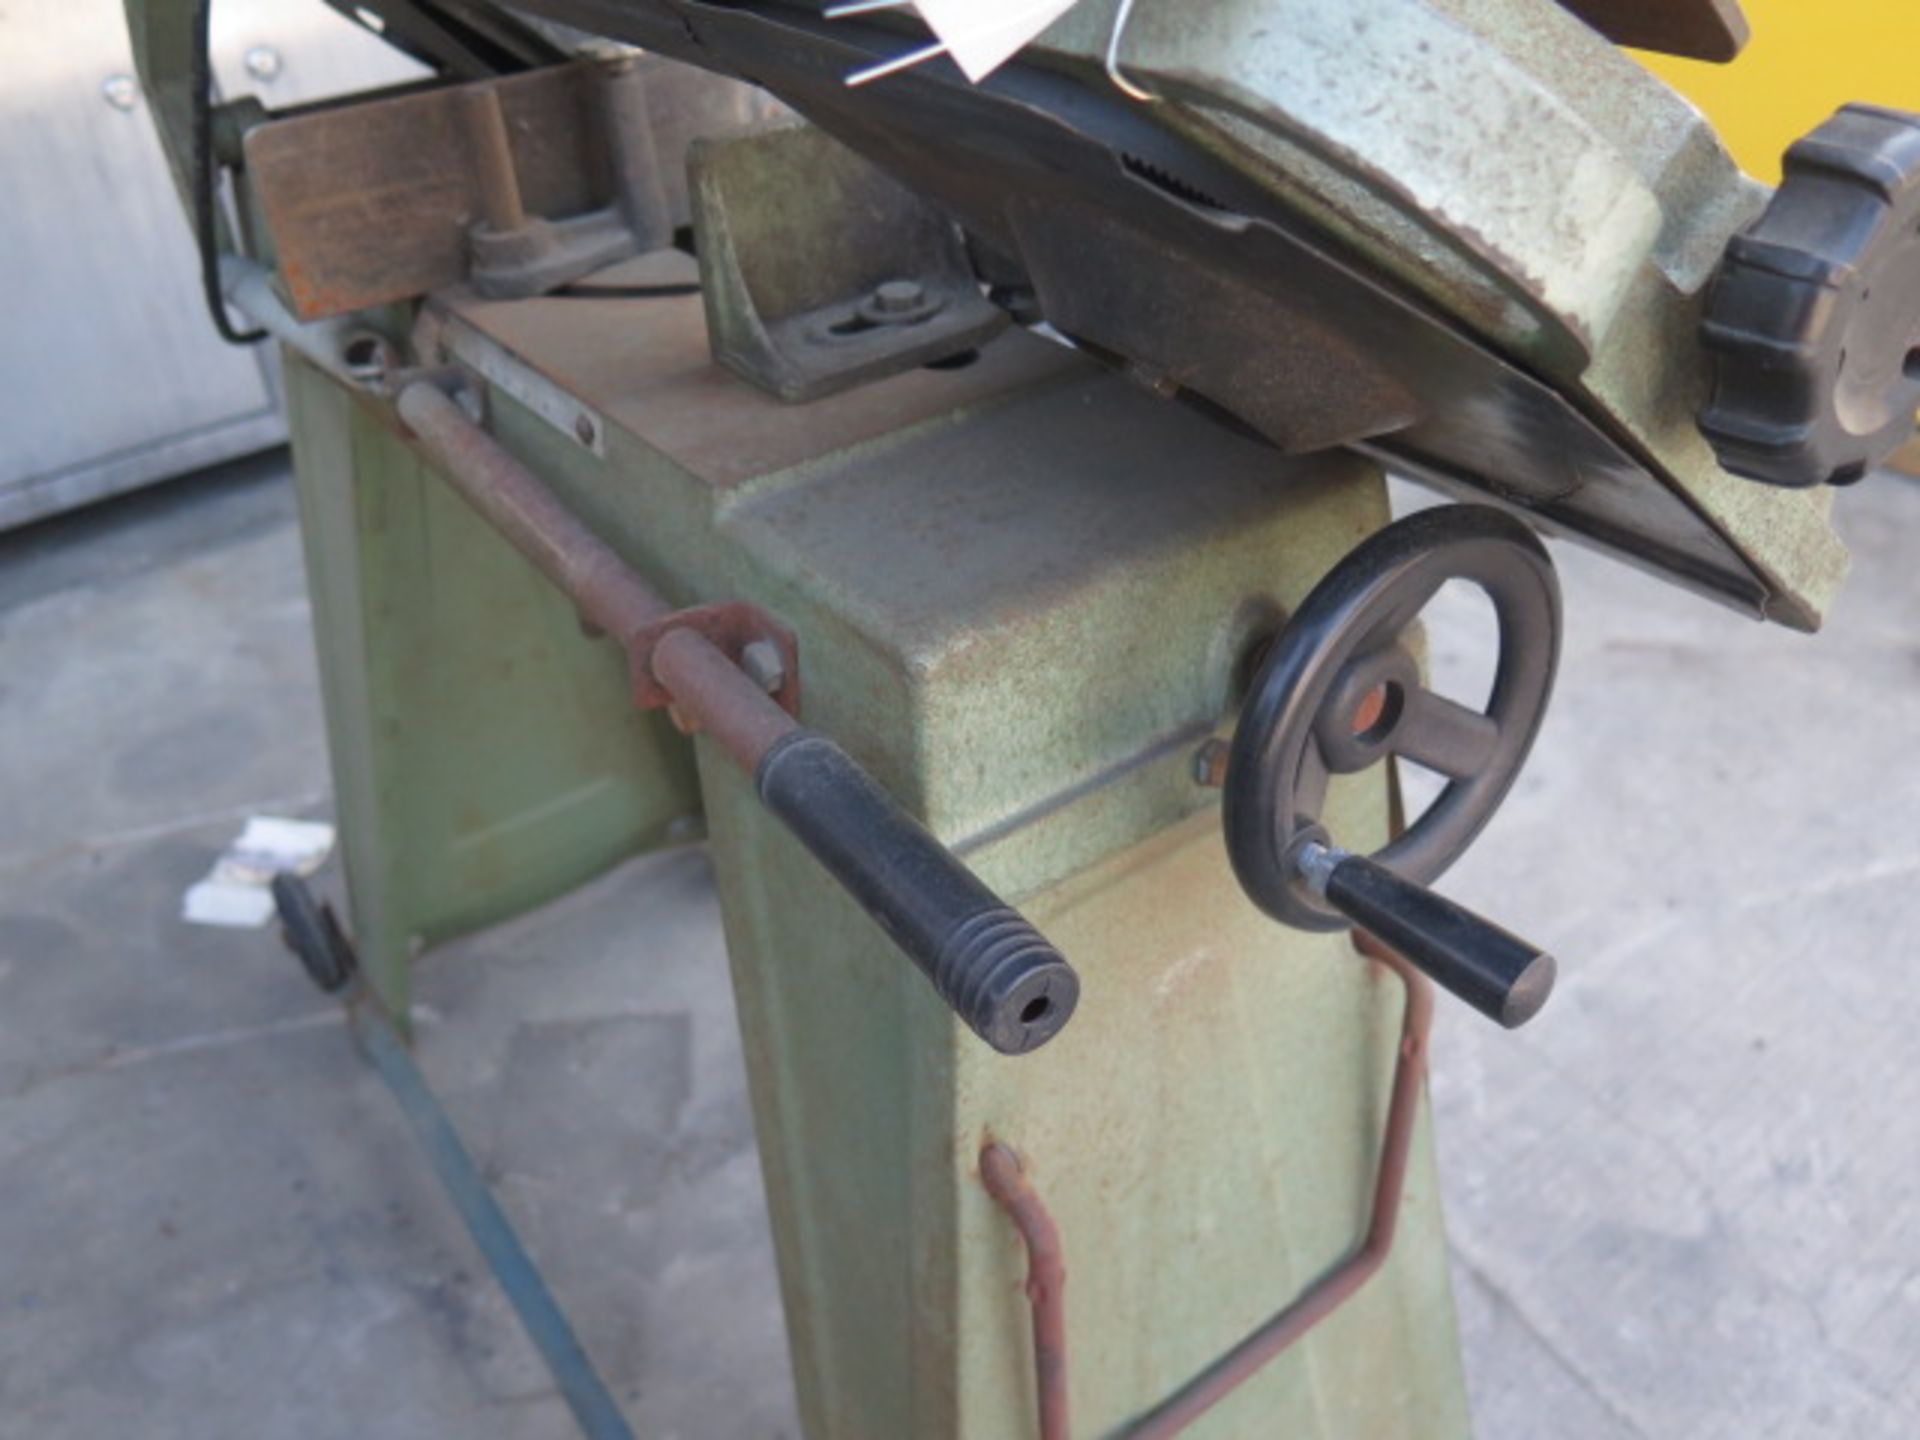 Central Machinery 4" Metal Cutting Band Saw w/ Manual Clamping, Work Stop - Image 5 of 5